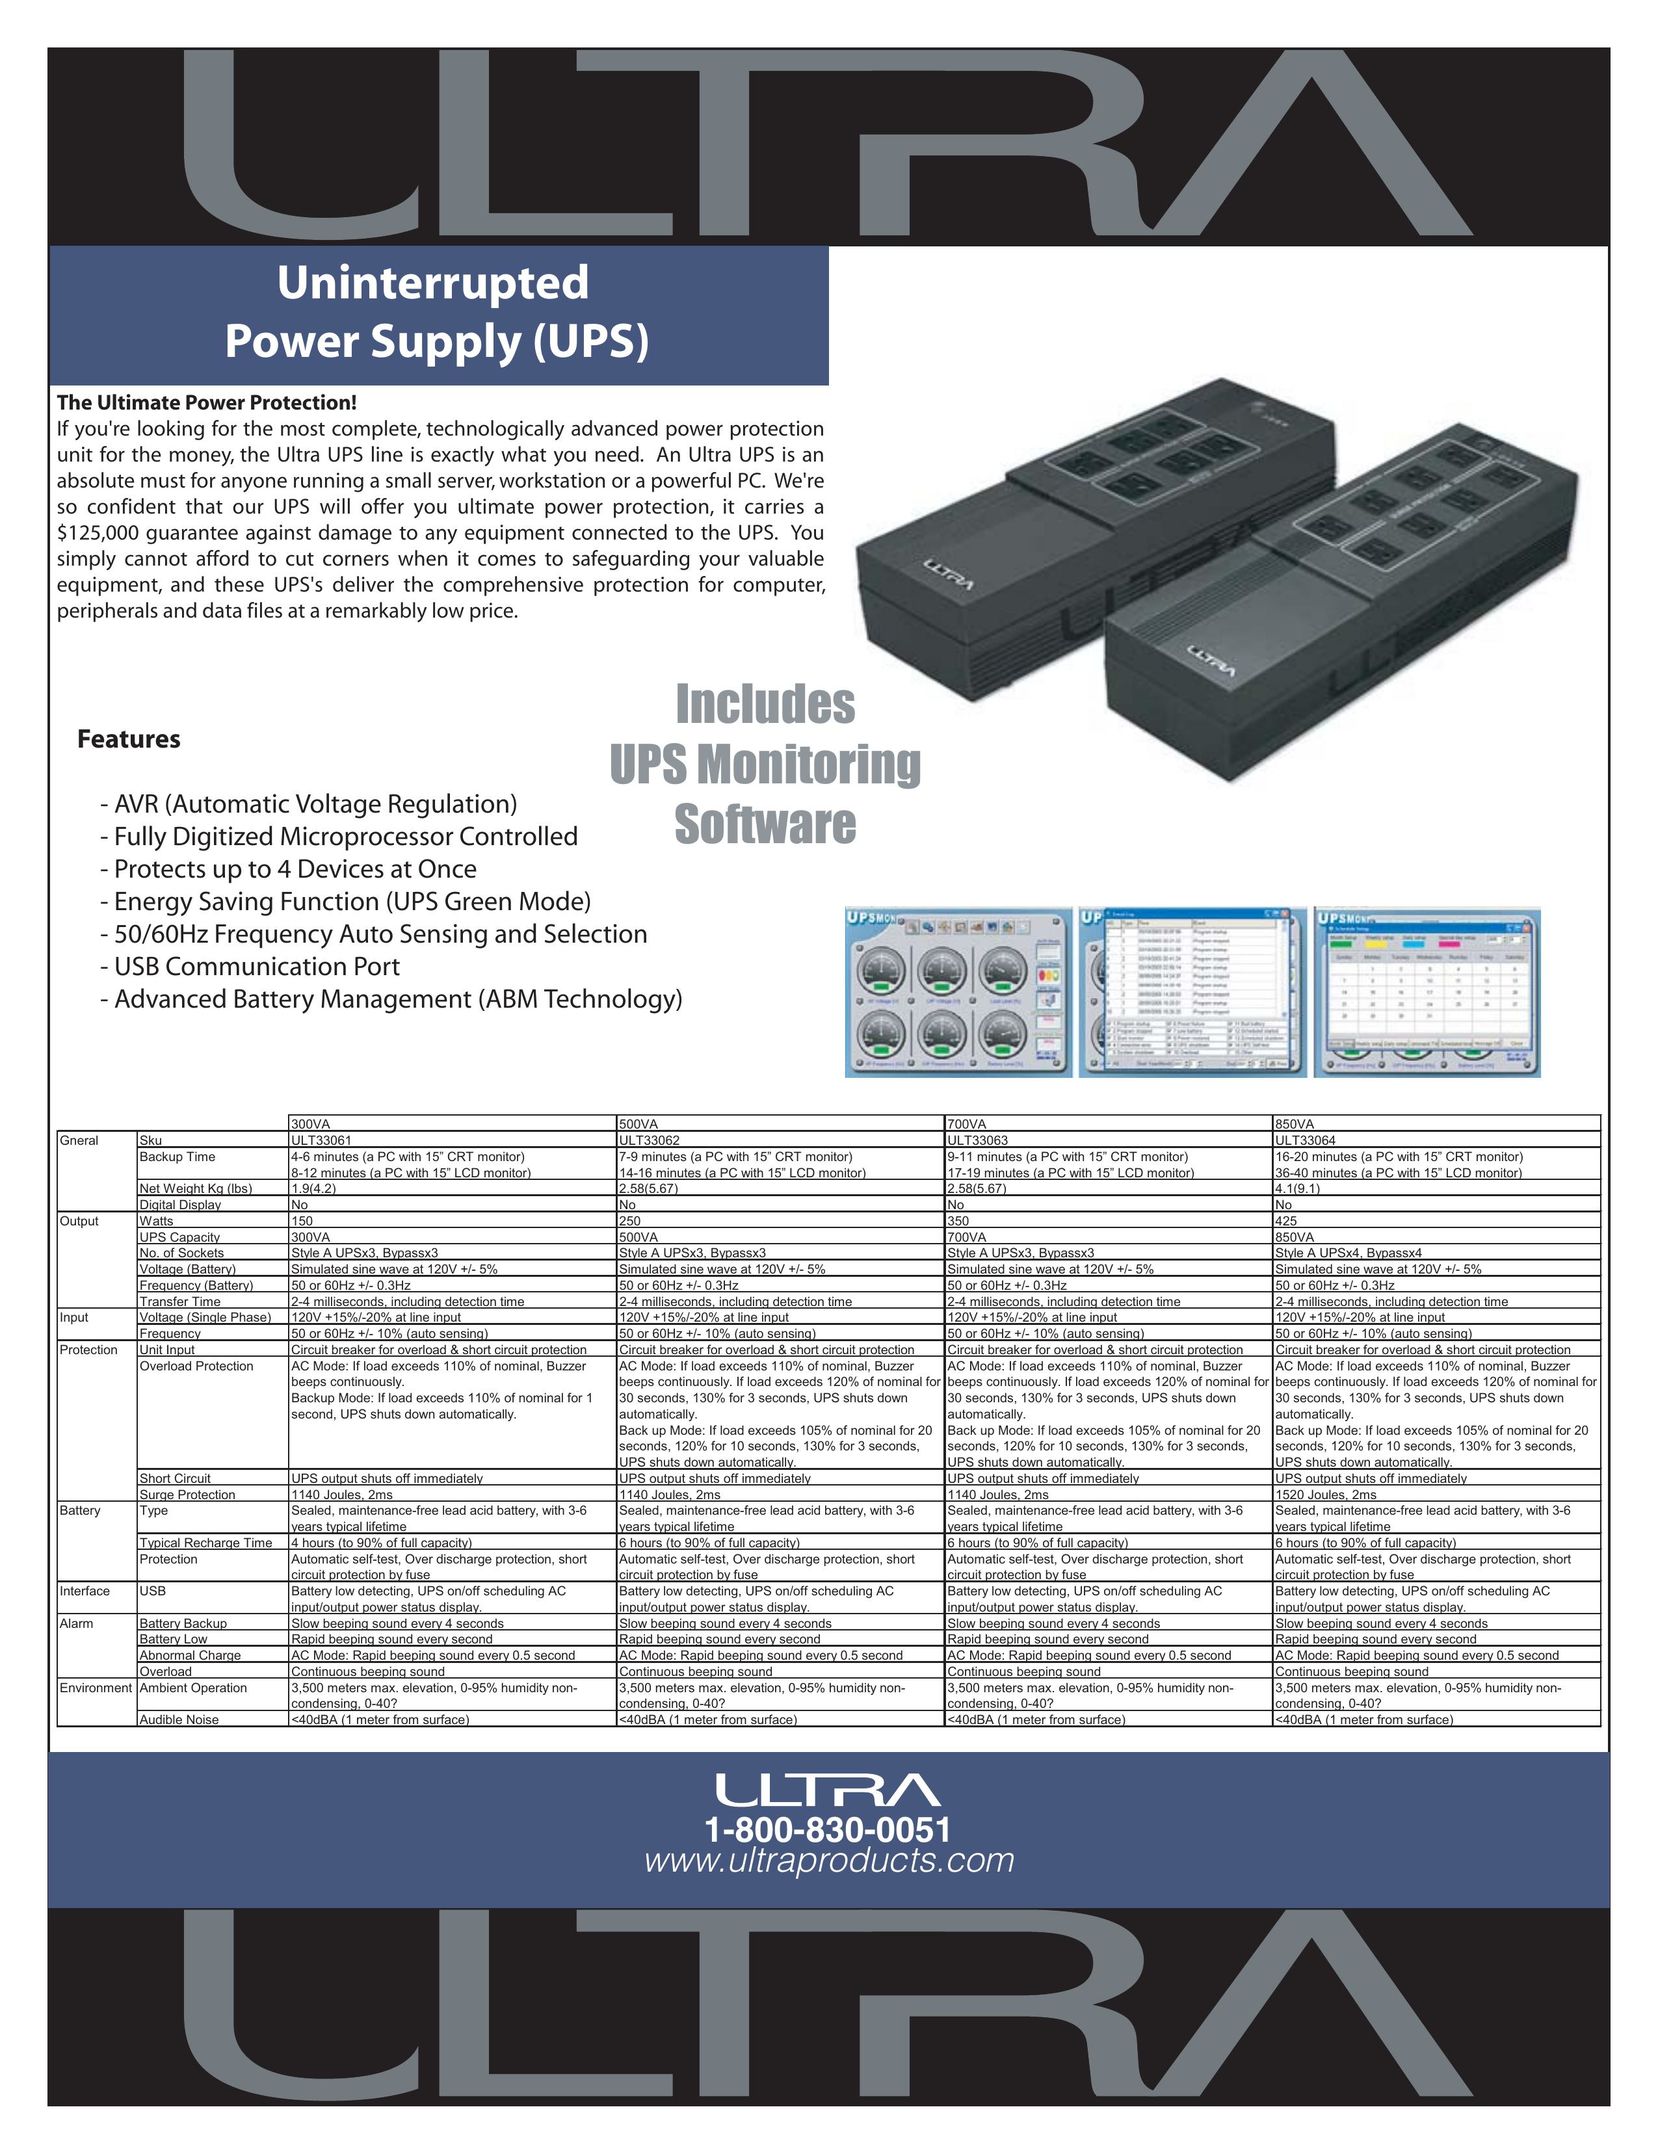 Ultra Products ULT33062 Power Supply User Manual